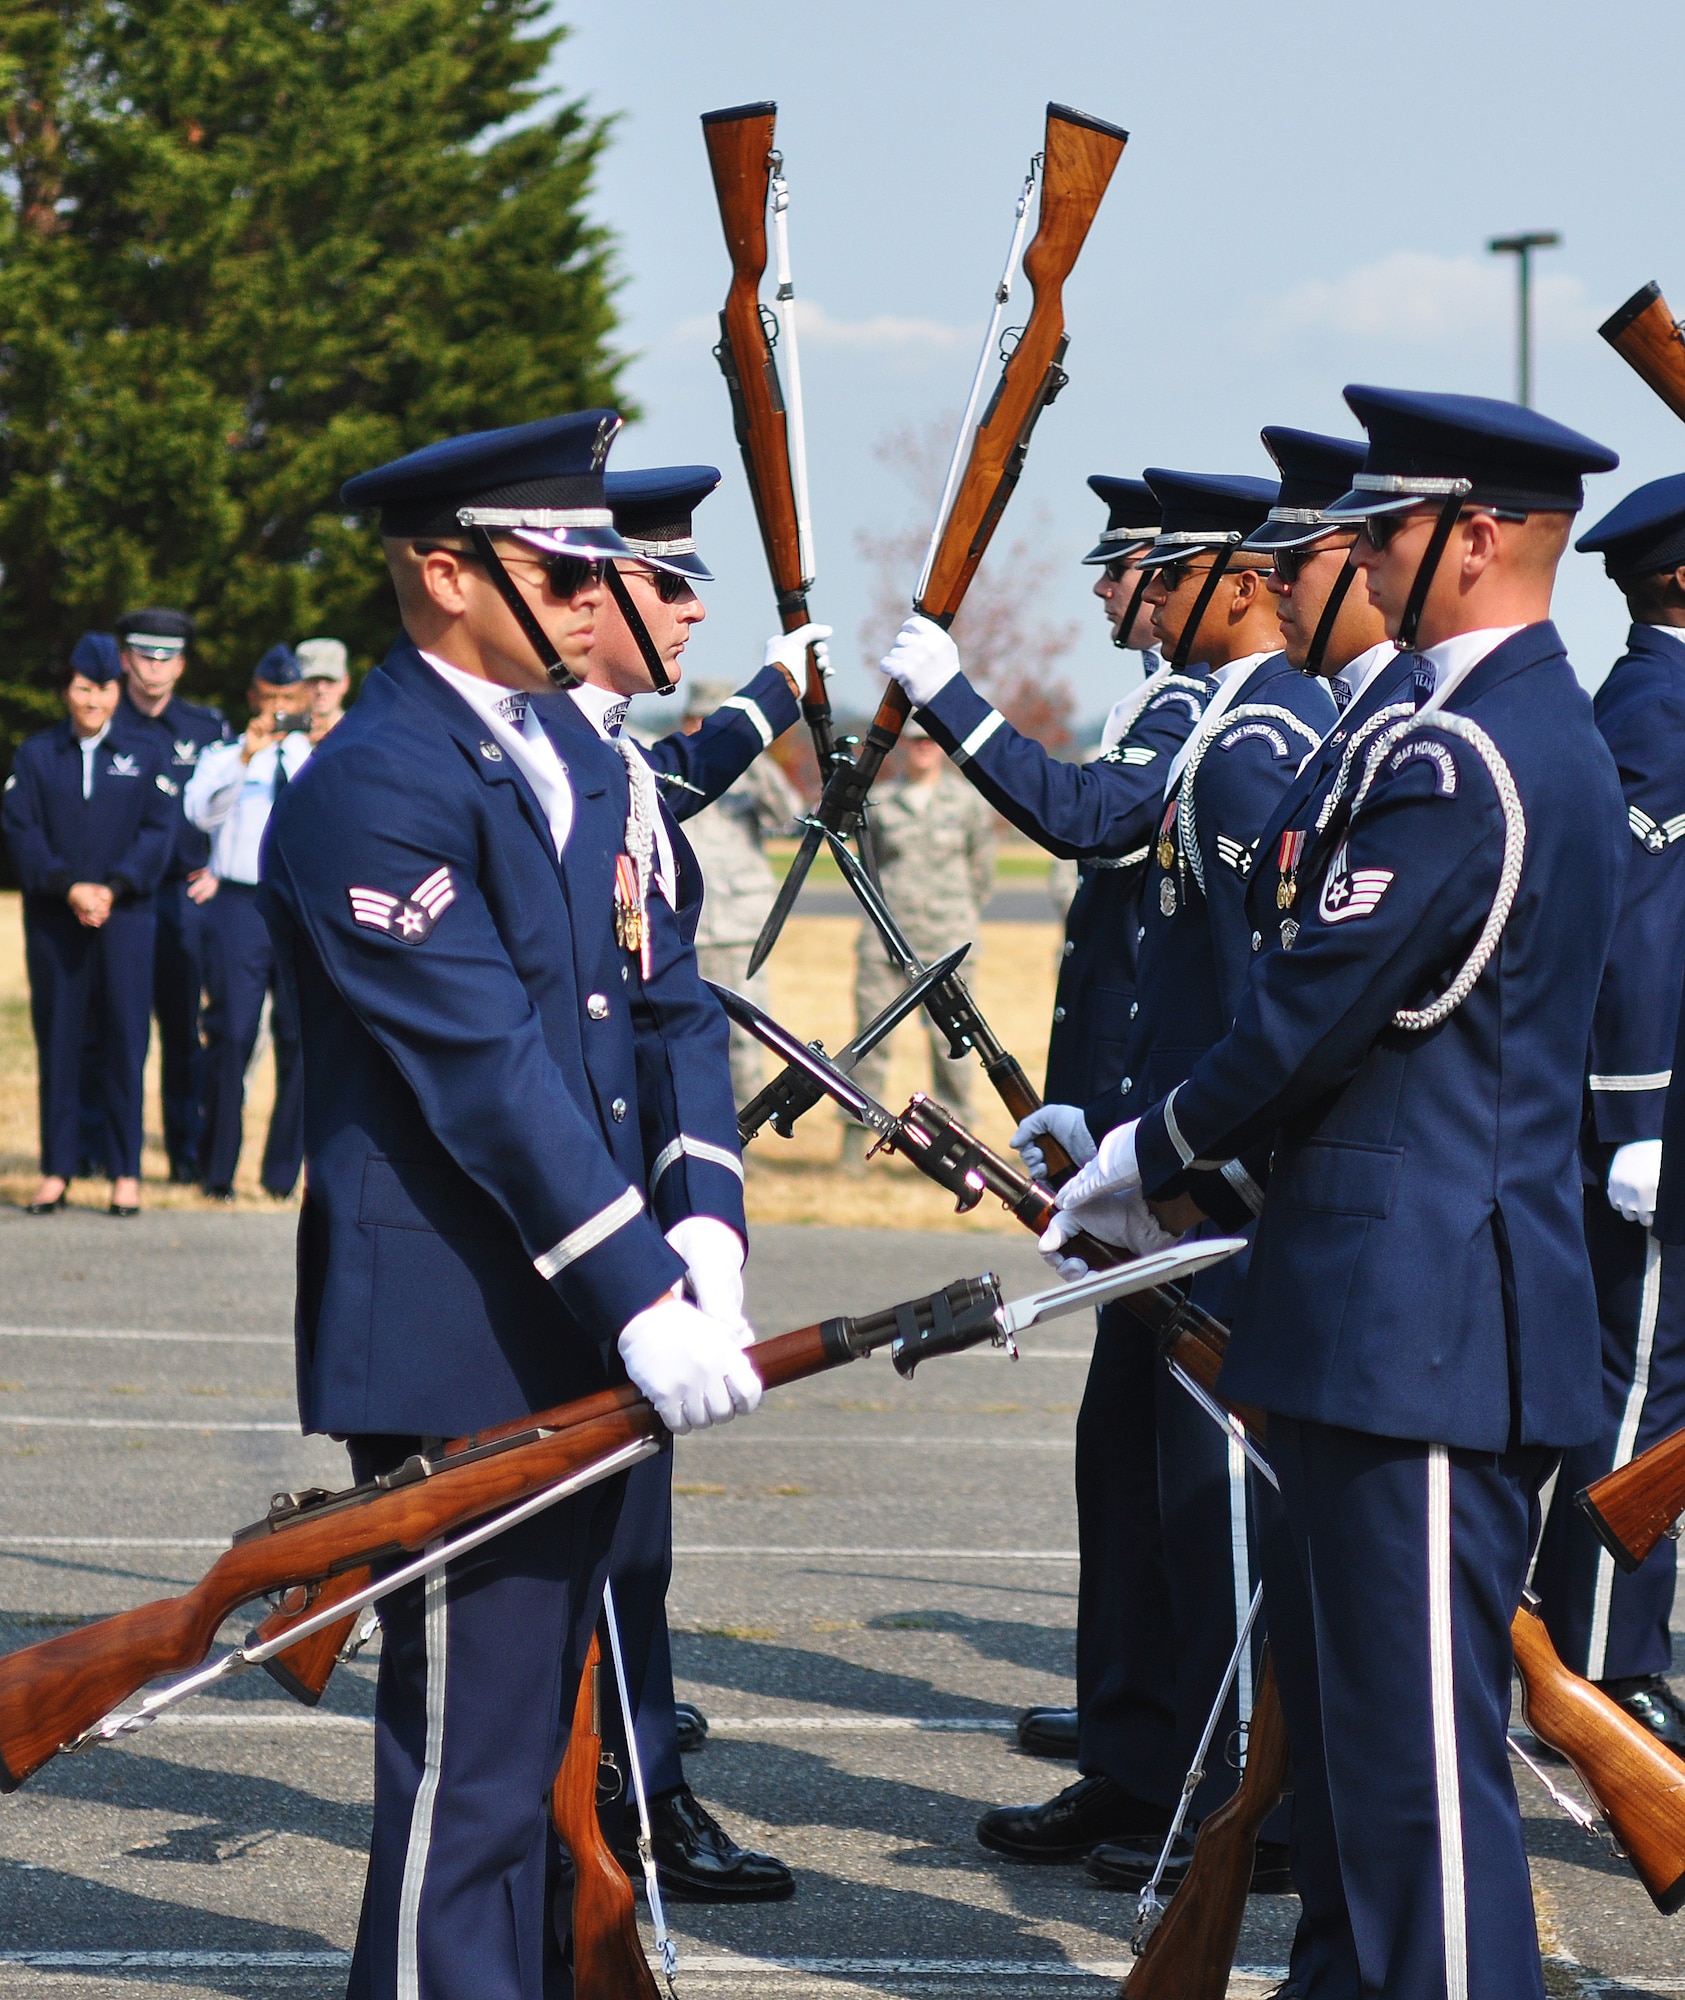 Members of the U.S. Air Force Honor Guard drill team perform harrowing movements with their M-1 Garand rifles with bayonets affixed, Sept 24, 2012, at Joint Base Lewis-McChord, Wash. The team stopped at JBLM on their tour around the country and performed many demonstrations around the area. (U.S. Air Force photo/Staff Sgt. Sean Tobin)